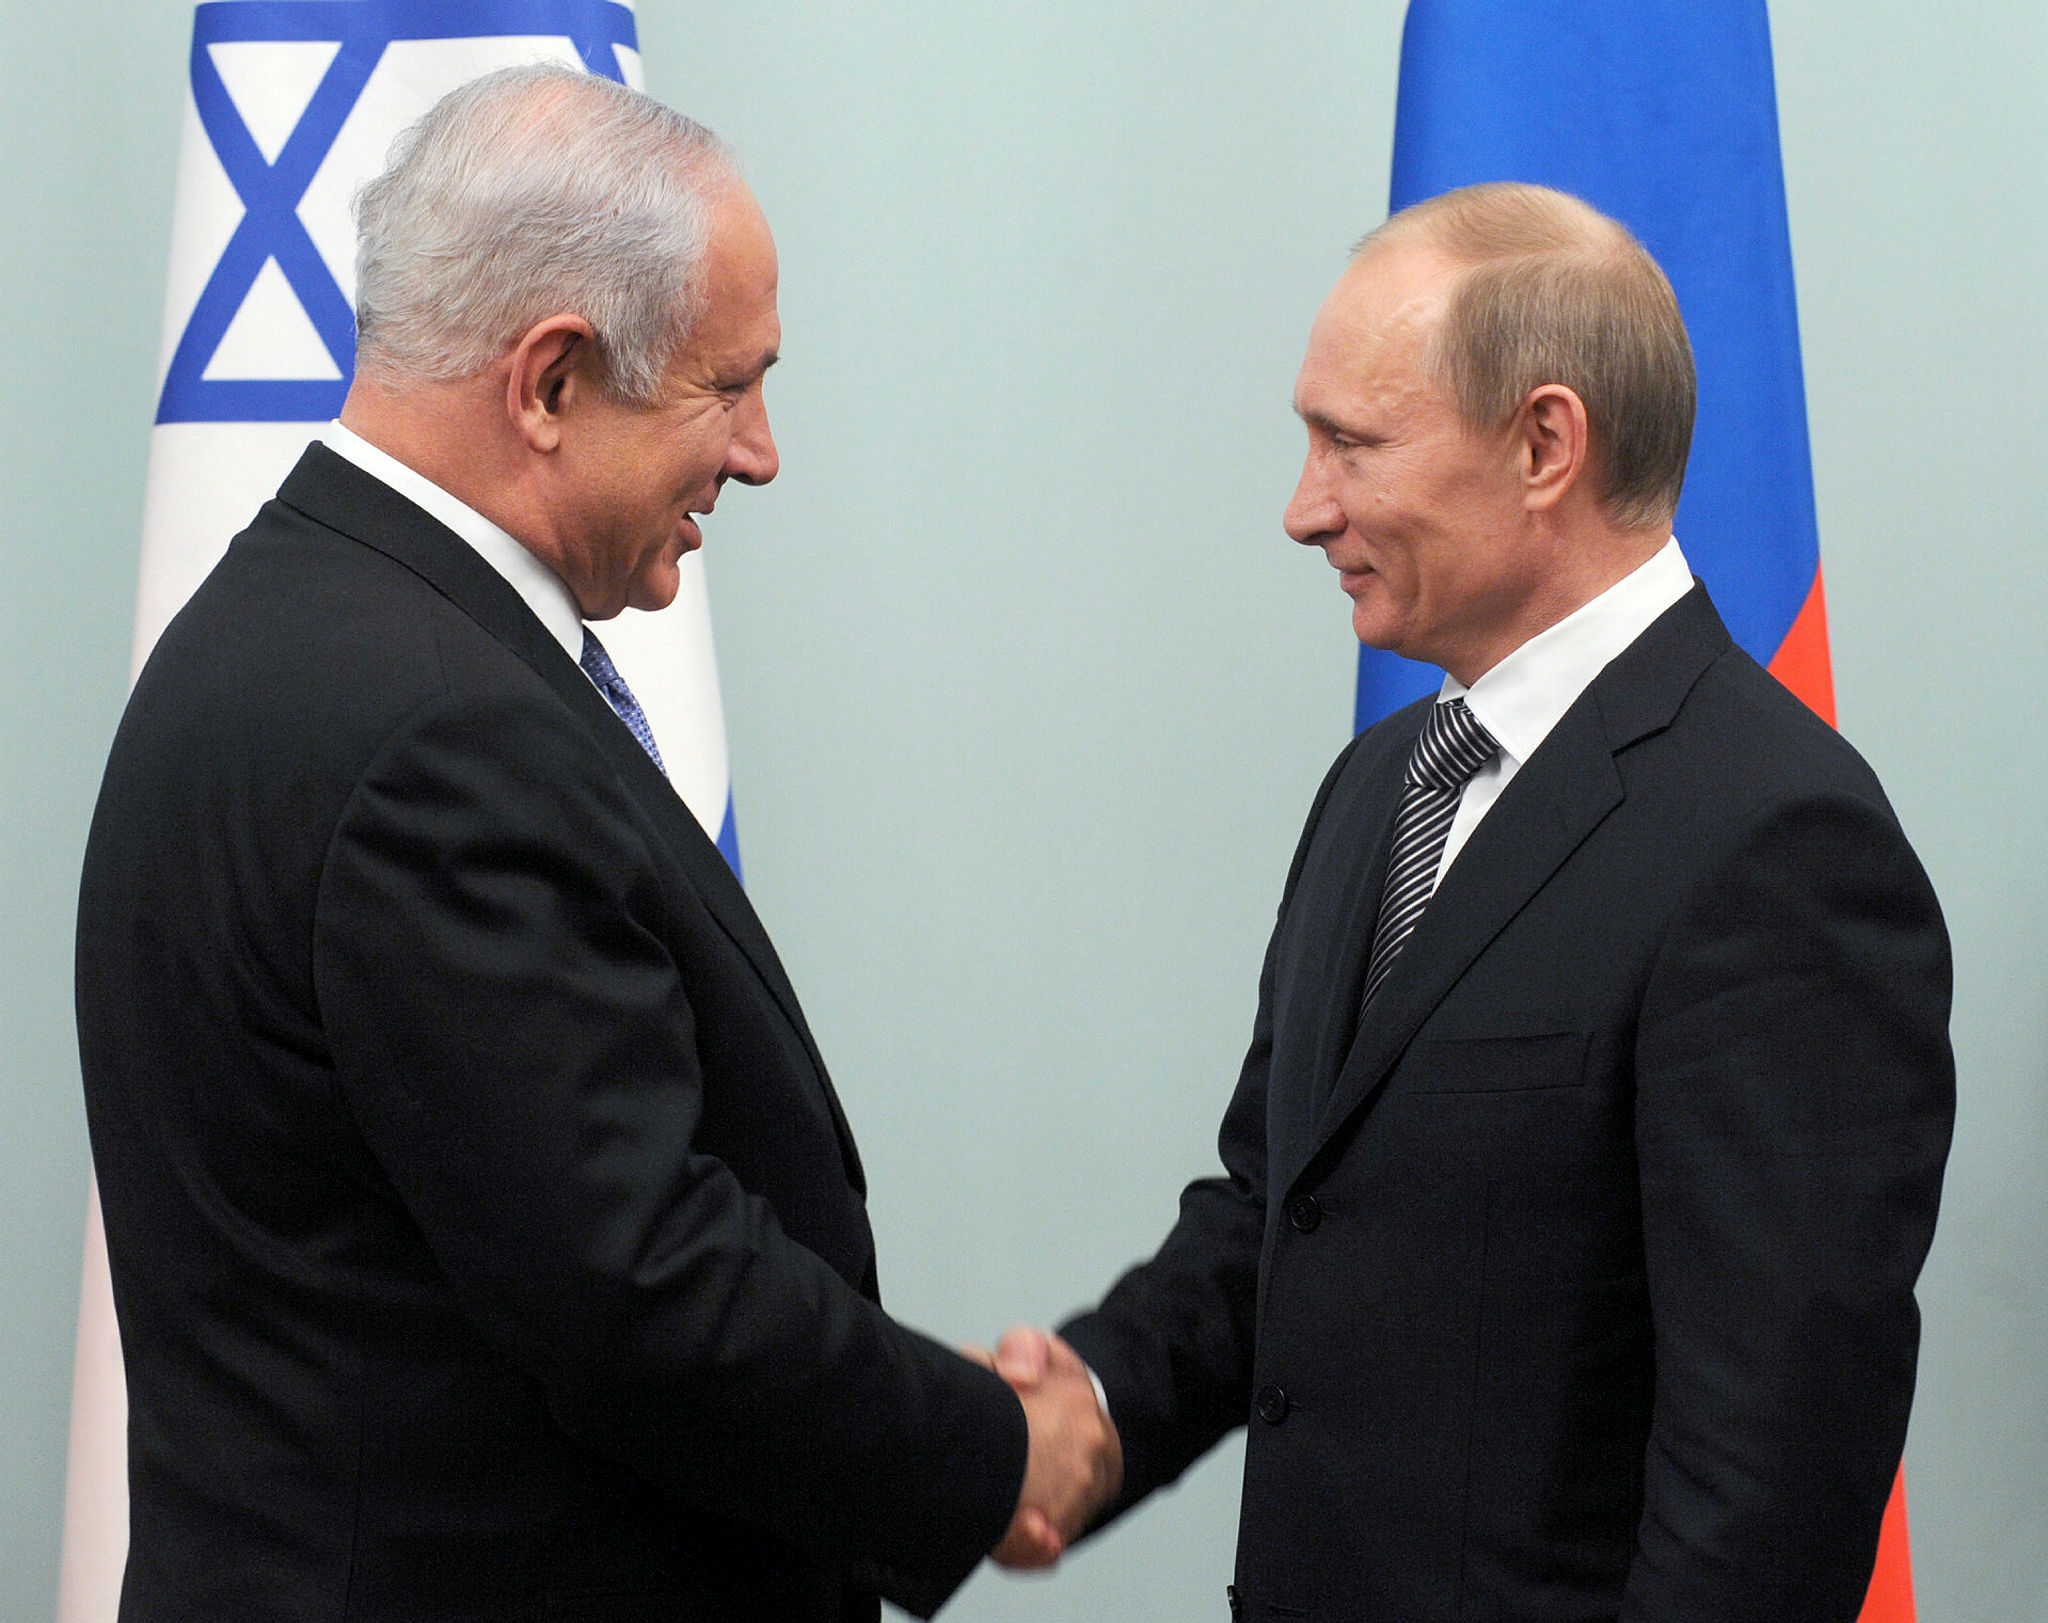 Prime Minister Netanyahu meets with the Prime Minister of Russia Vladimir Putin